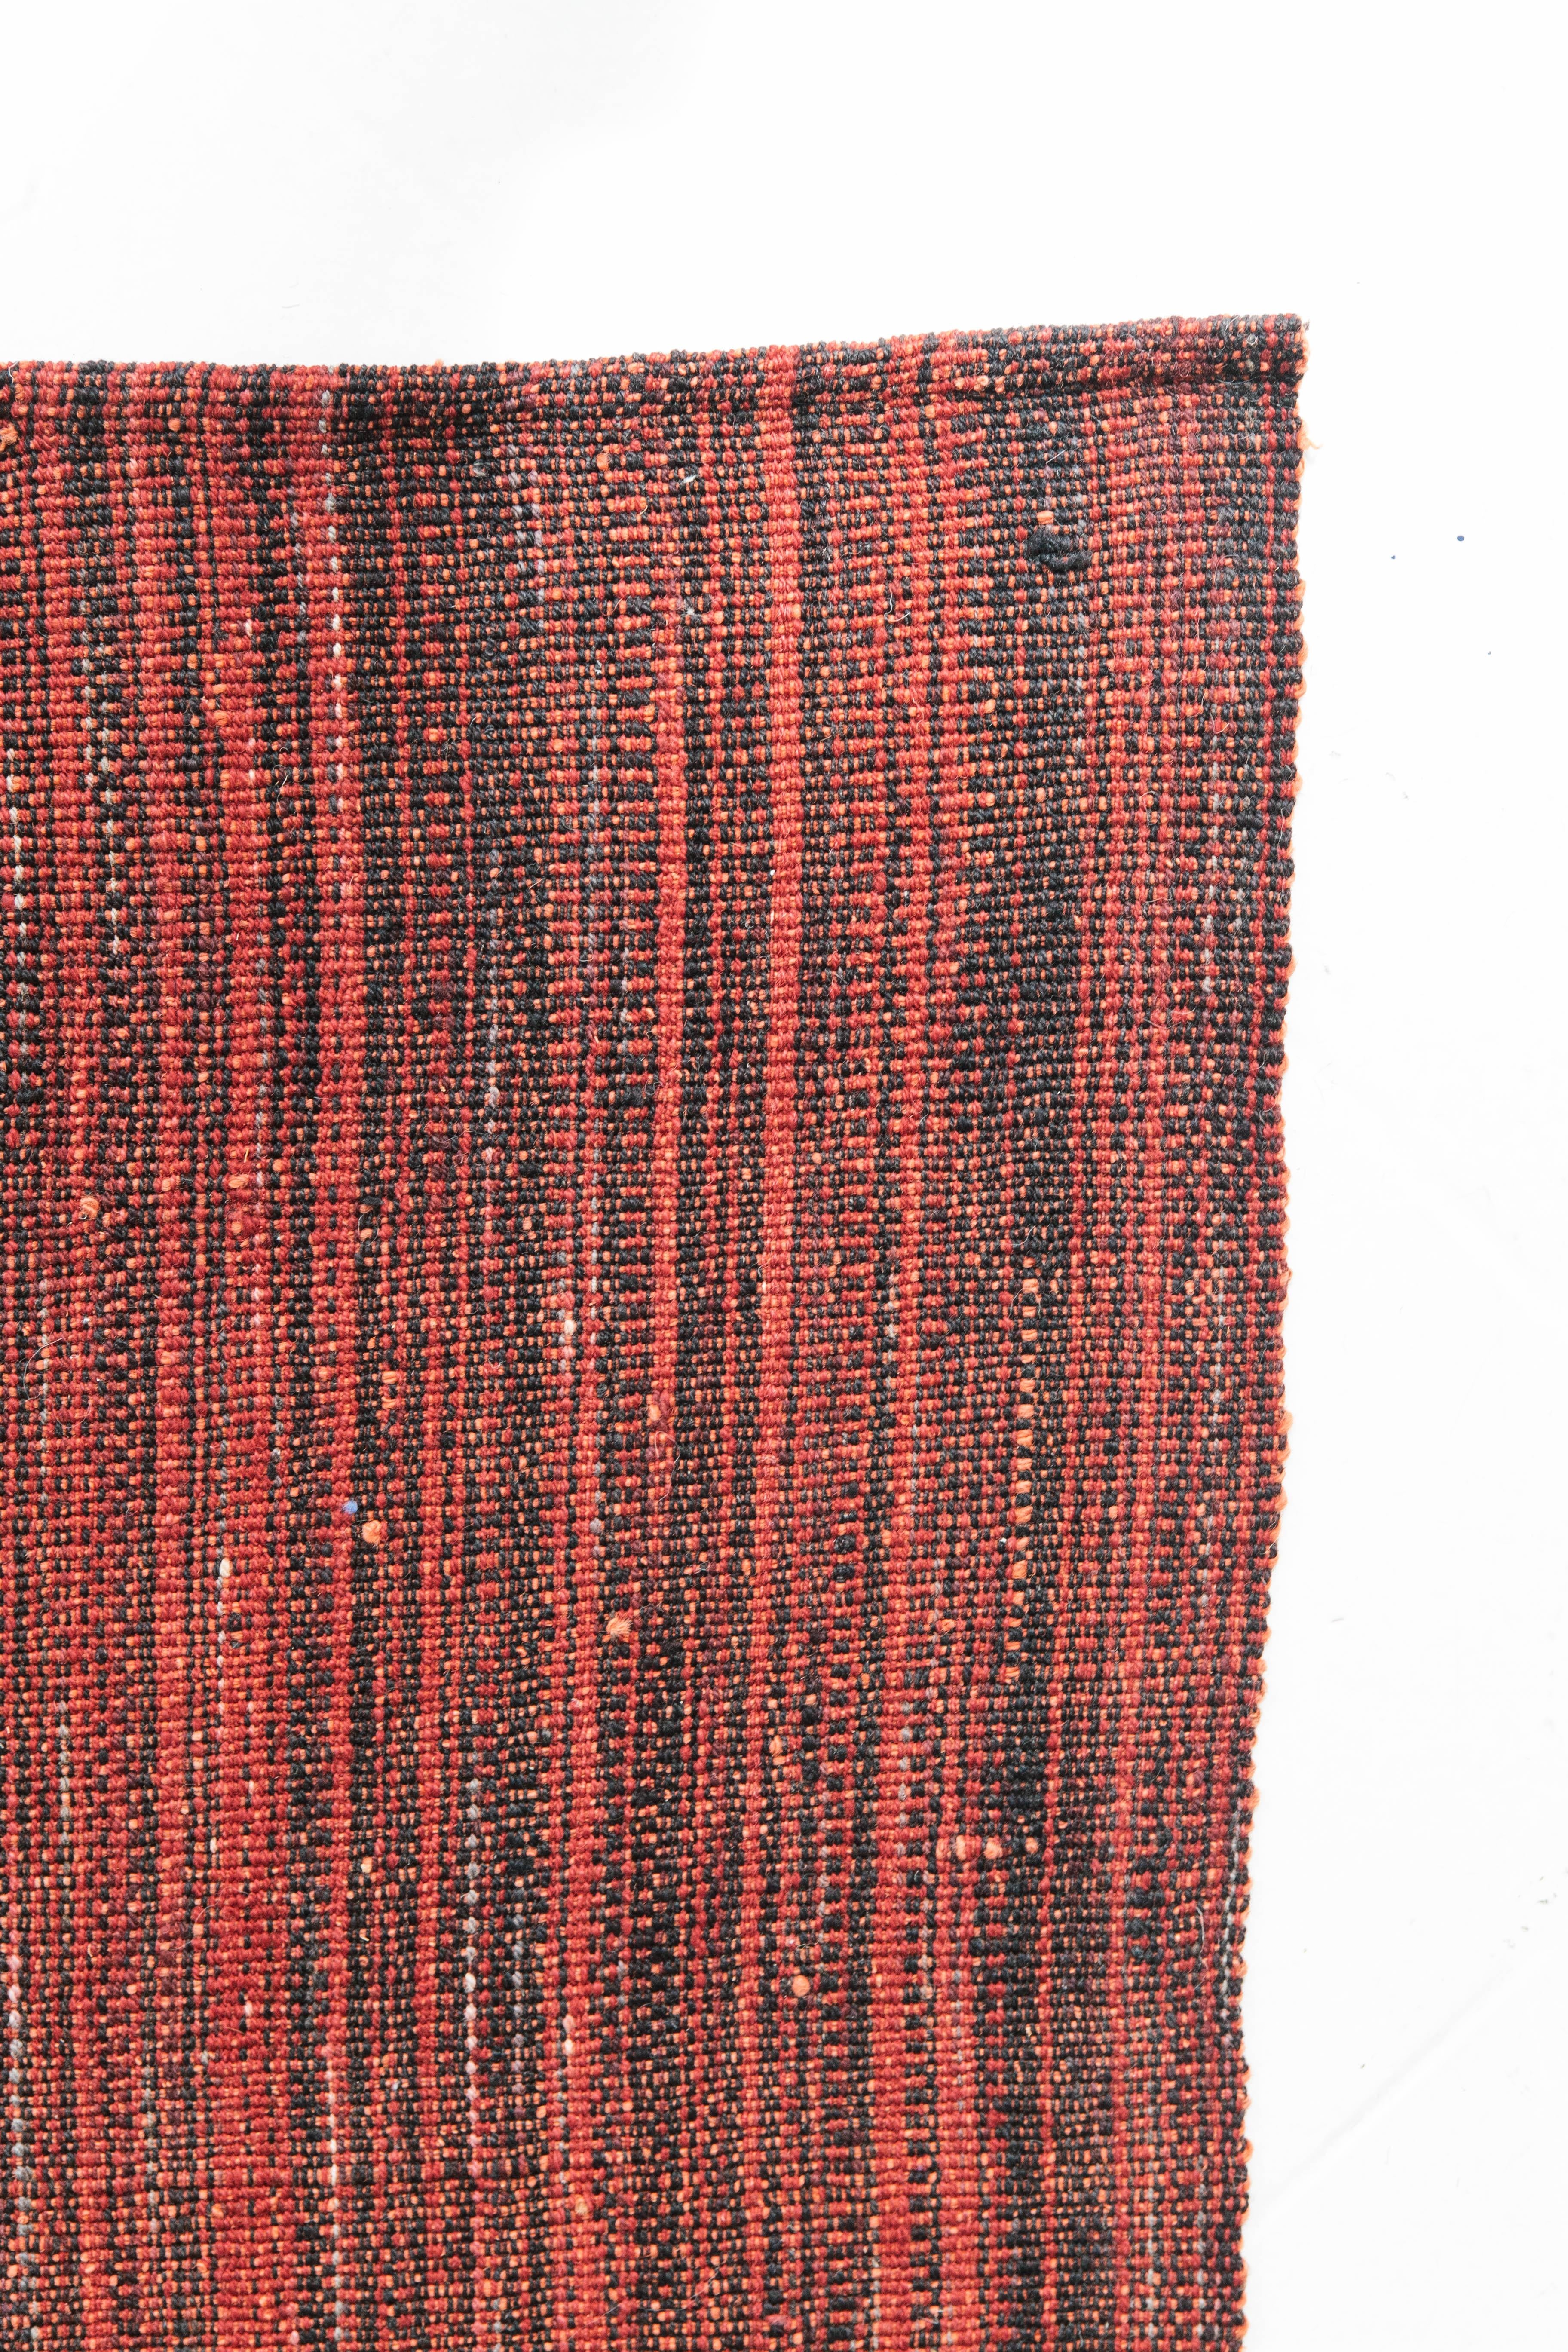 This Persian Edel Kilim flat-weave rug is sophisticated and complicated yet simplistic. A beautiful red and black Kilim that would fit great in a wide variety of interiors. Persian flat weaves are made up of some of the best wool and weaved